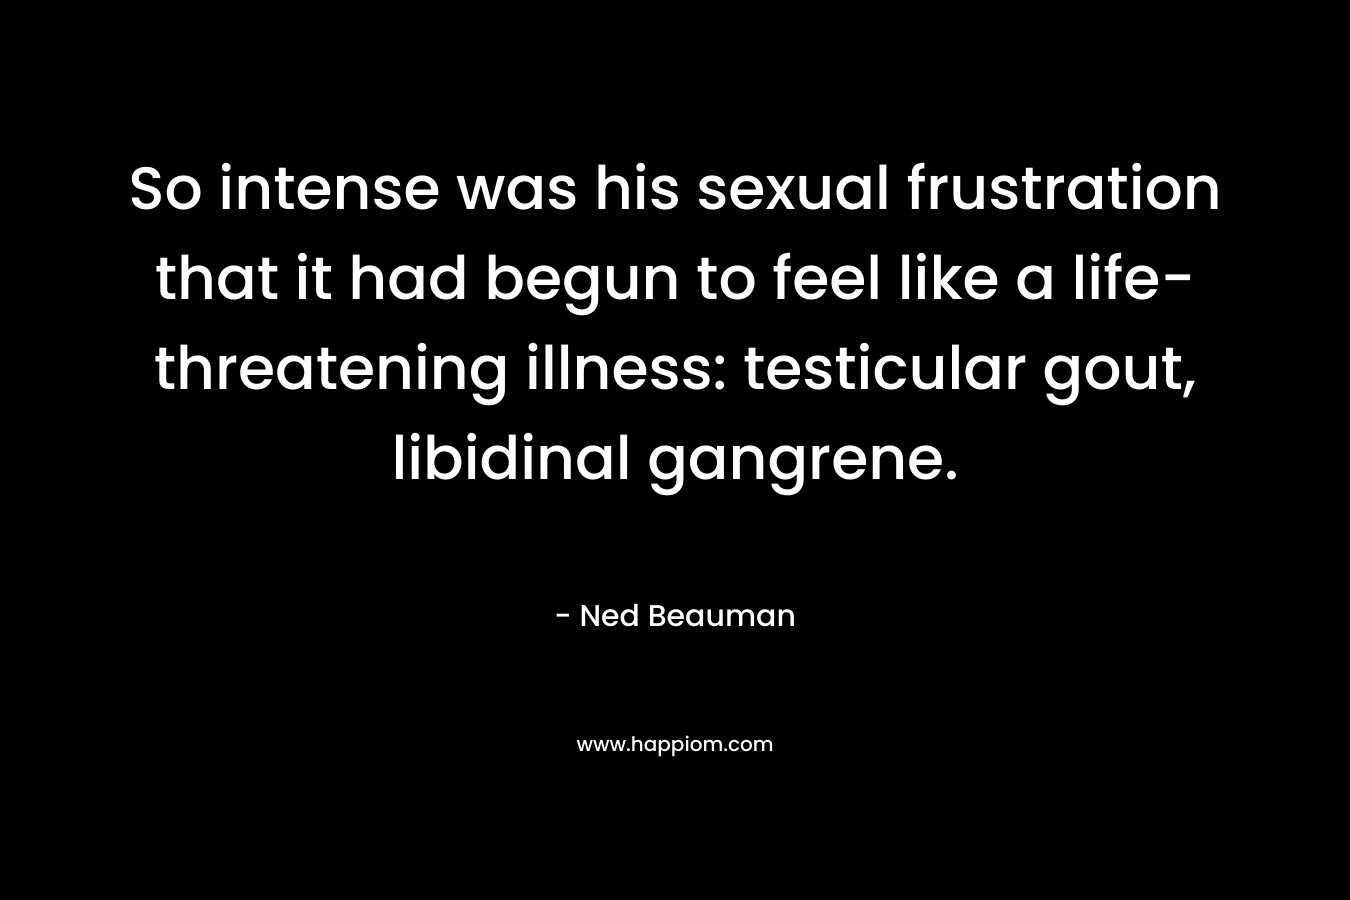 So intense was his sexual frustration that it had begun to feel like a life-threatening illness: testicular gout, libidinal gangrene. – Ned Beauman